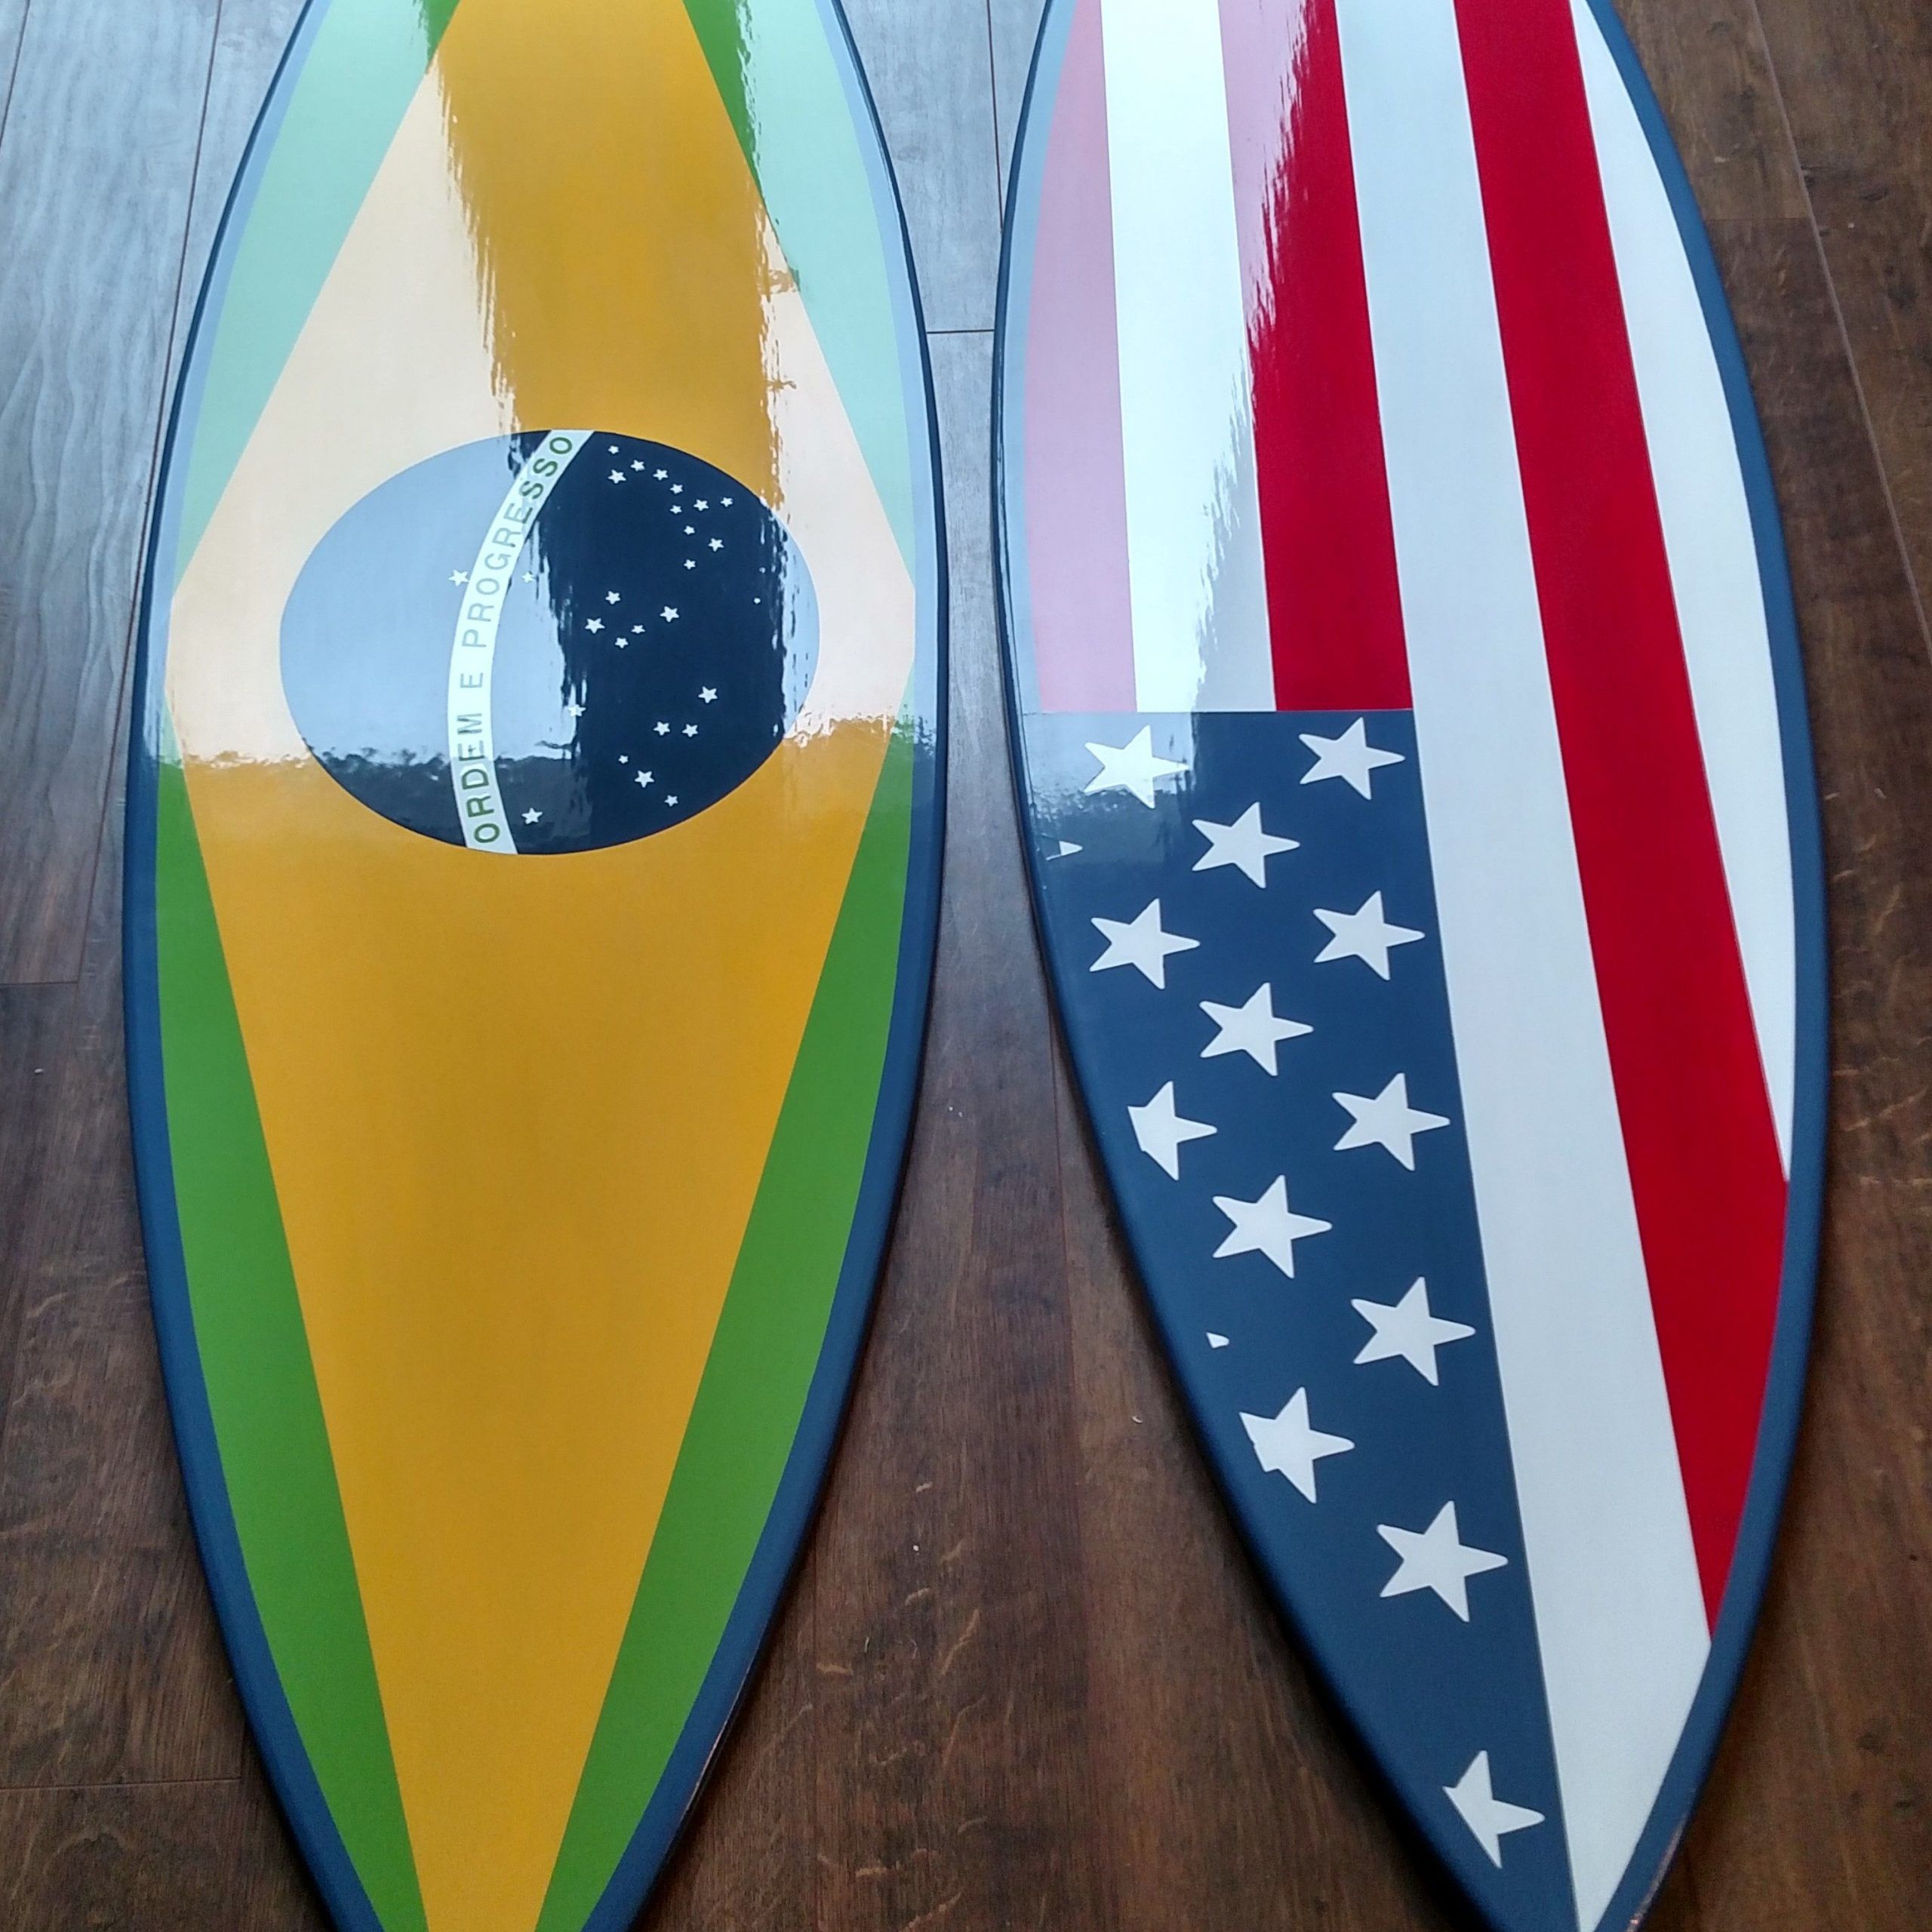 Buy A Custom Surfboard Wall Art American Flag Or Brazil In Surfing Wall Art (View 11 of 15)